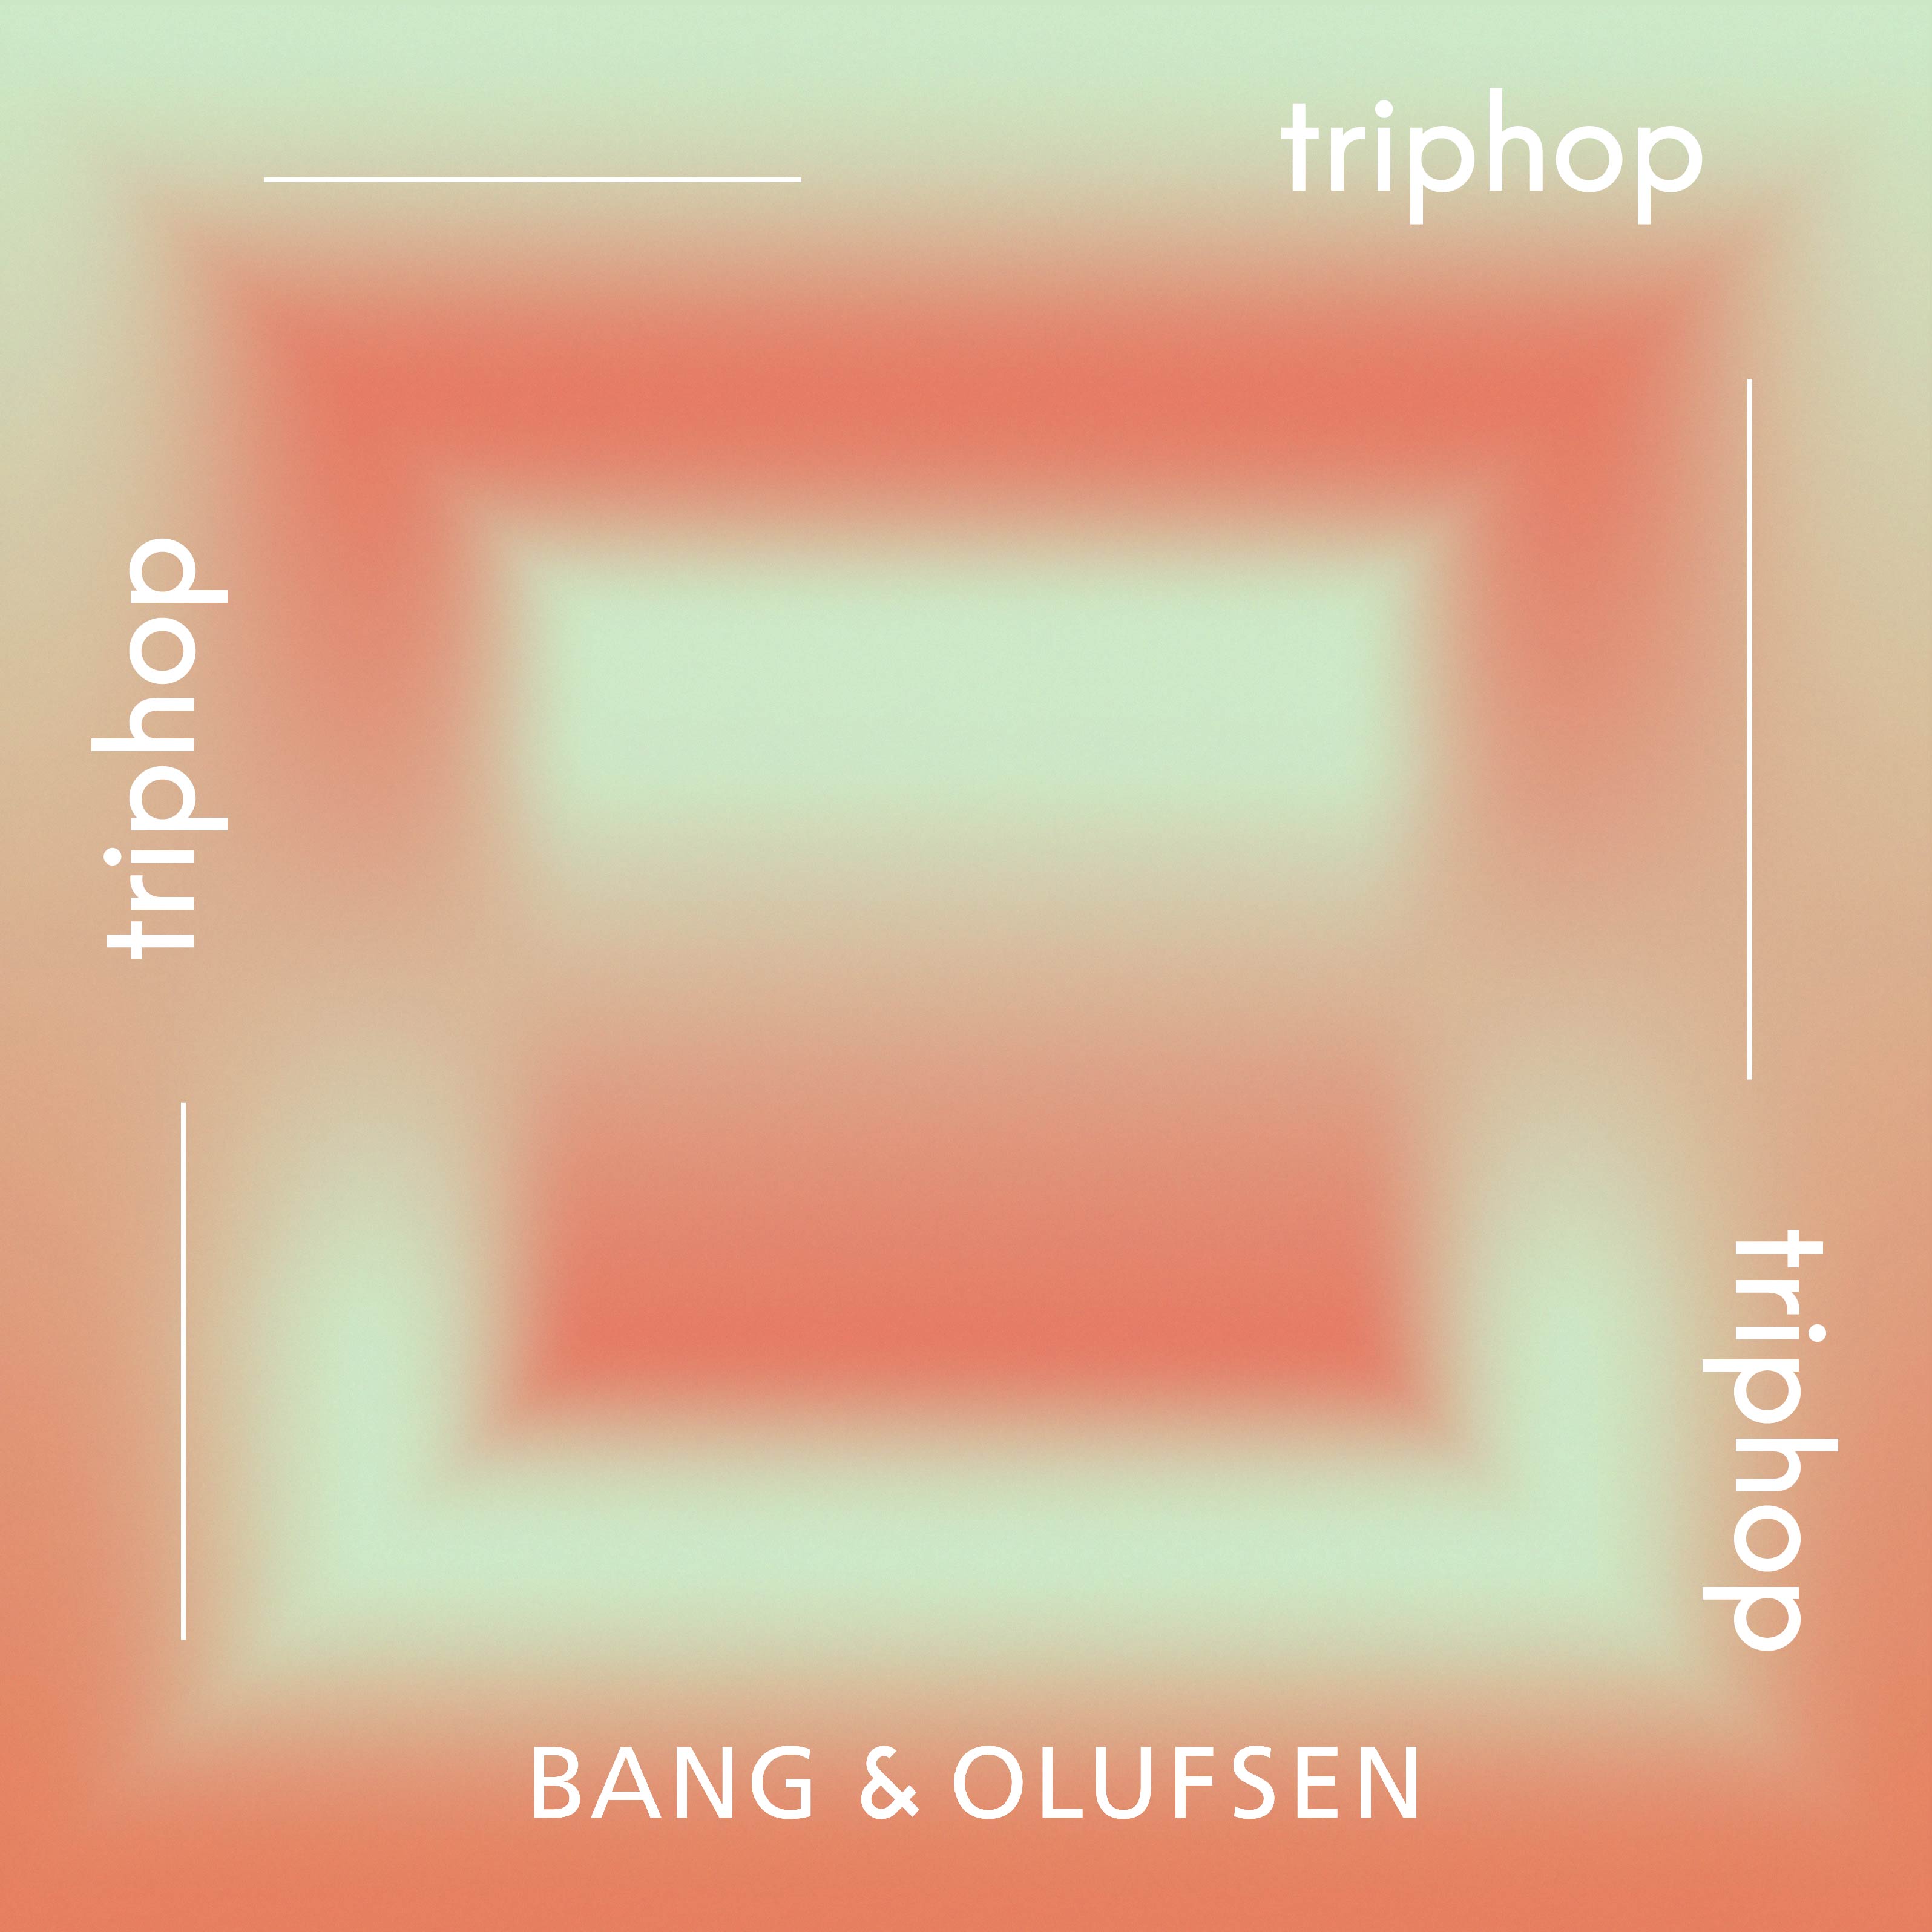 Bang & Olufsen on Twitter: if you prefer listening on @Deezer or @TIDAL you can find the links right here: Deezer: https://t.co/fBg4ggPQ9a Tidal: https://t.co/Y8qe6bBGDU" /